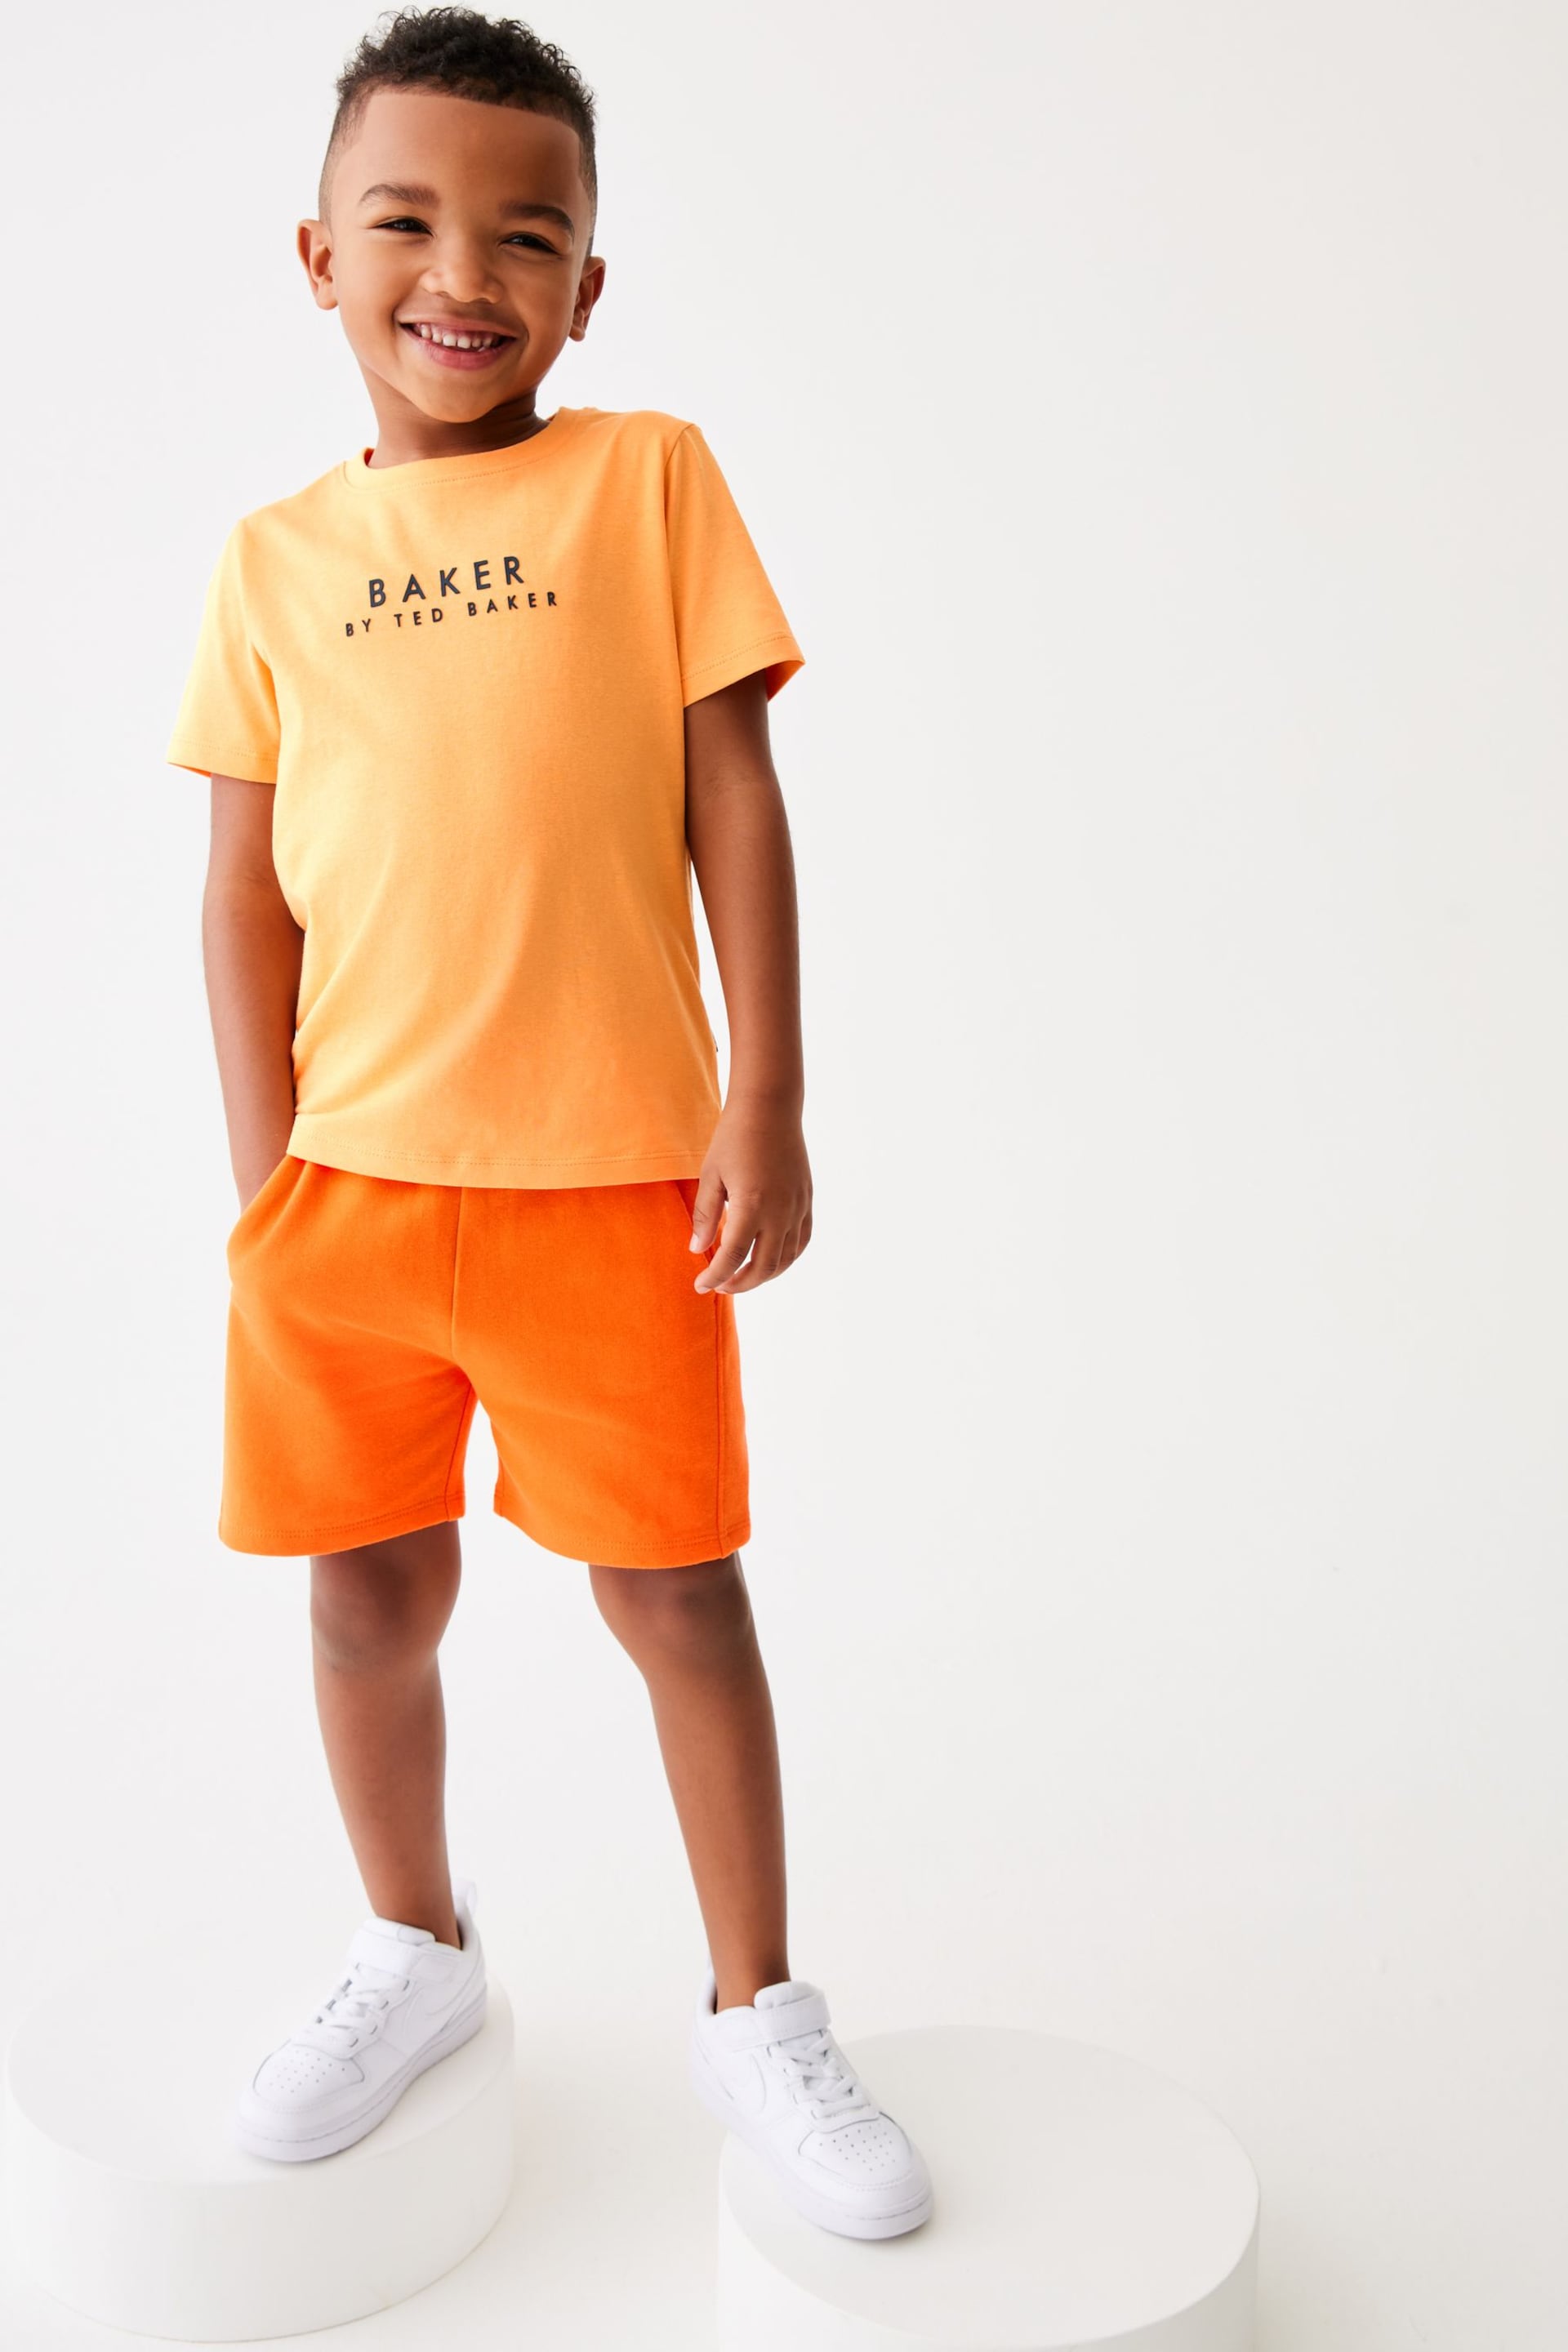 Baker by Ted Baker T-Shirt and Shorts Set - Image 1 of 13